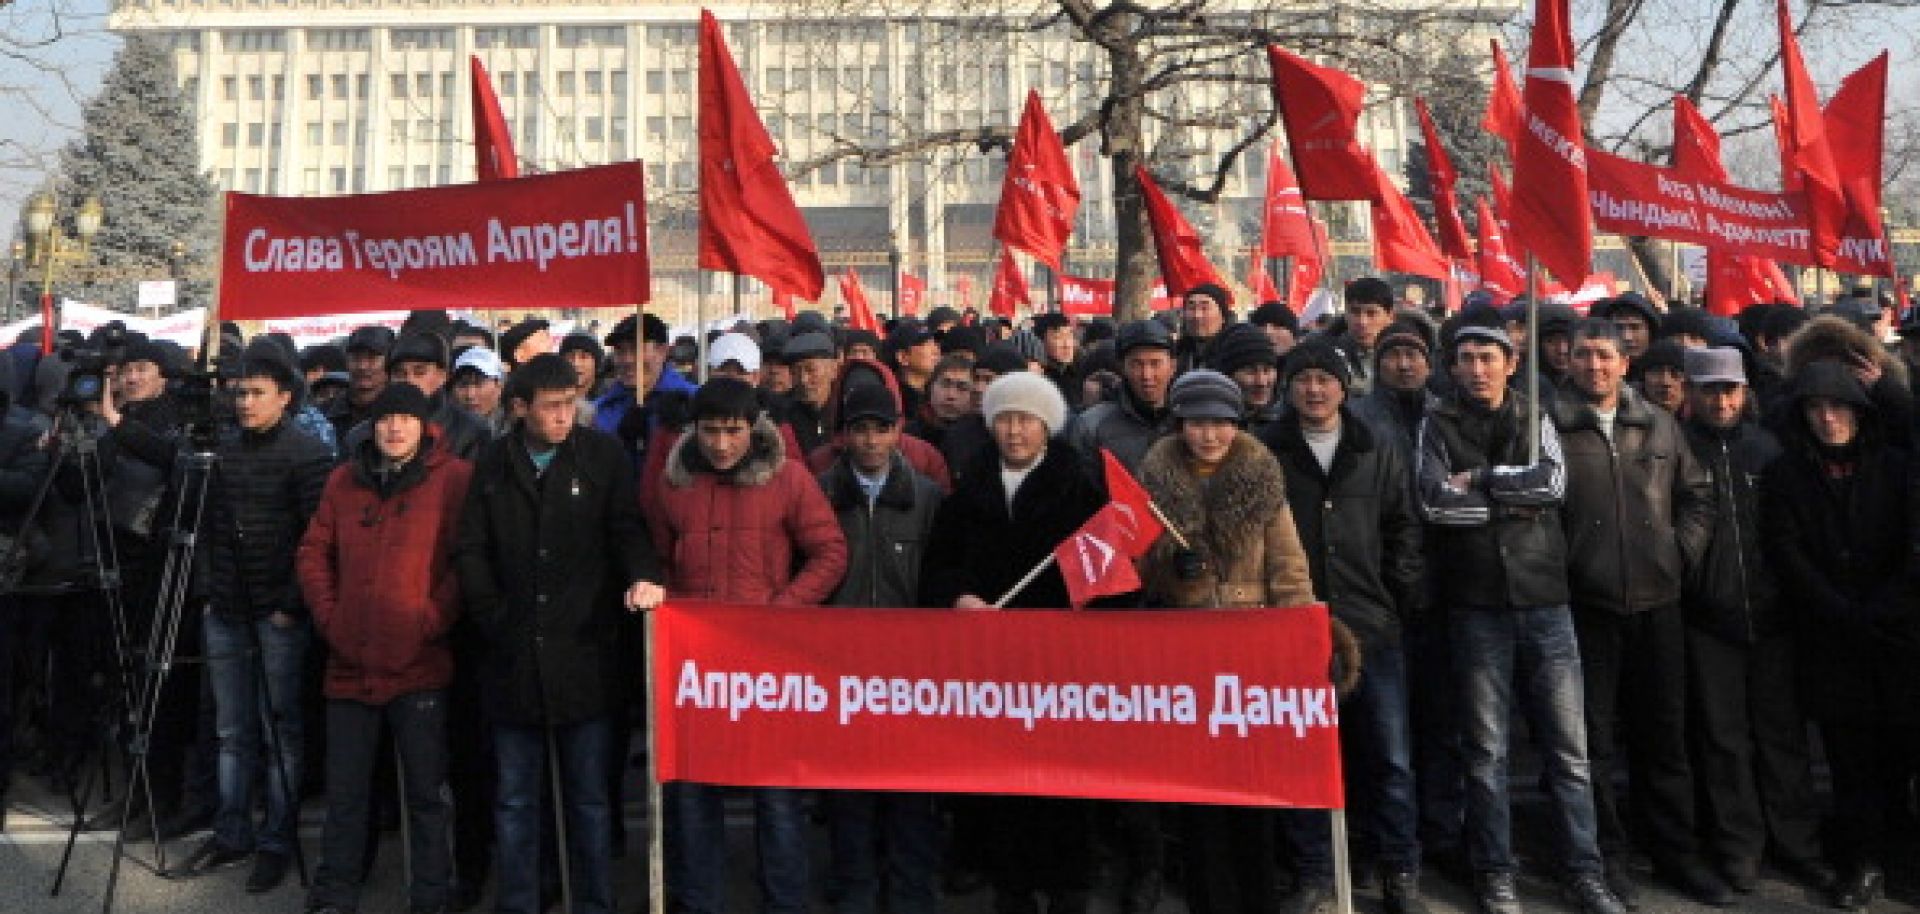 Kyrgyzstan: Challenges to Stability